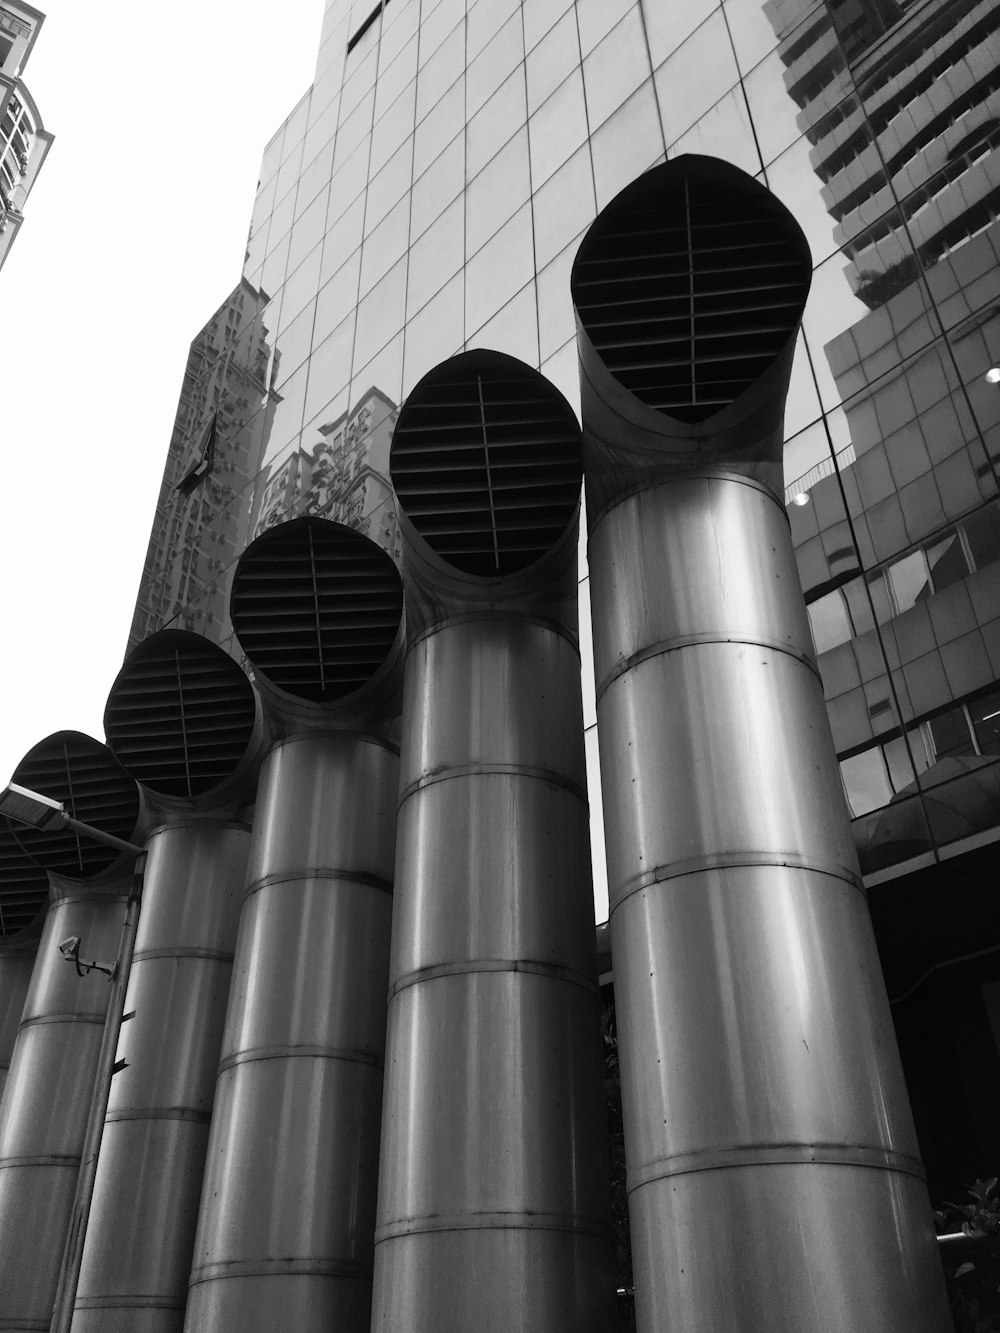 a group of metal pipes